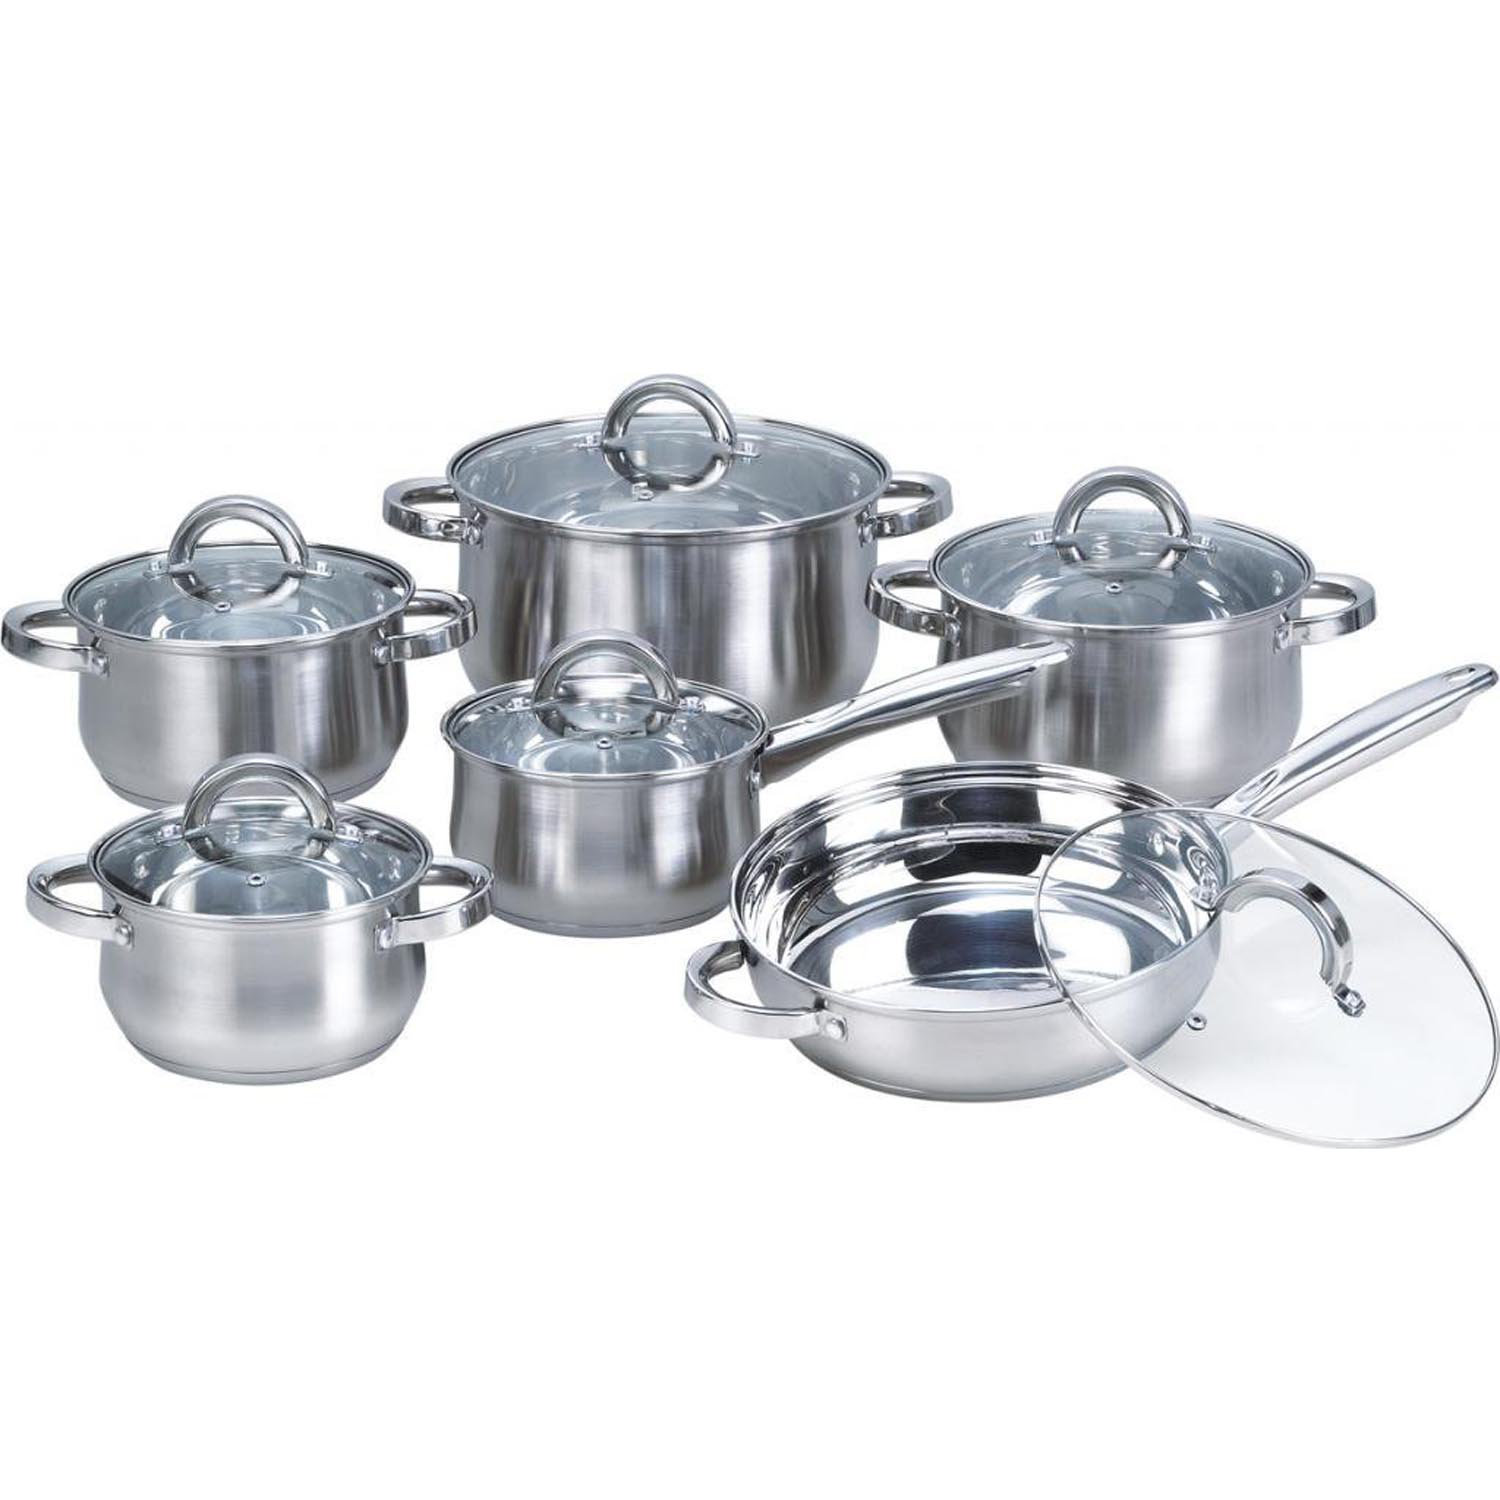 Gourmet by Bergner - 12 PC Stainless Steel Pots and Pans Cookware Set, 12 Pieces, Polished